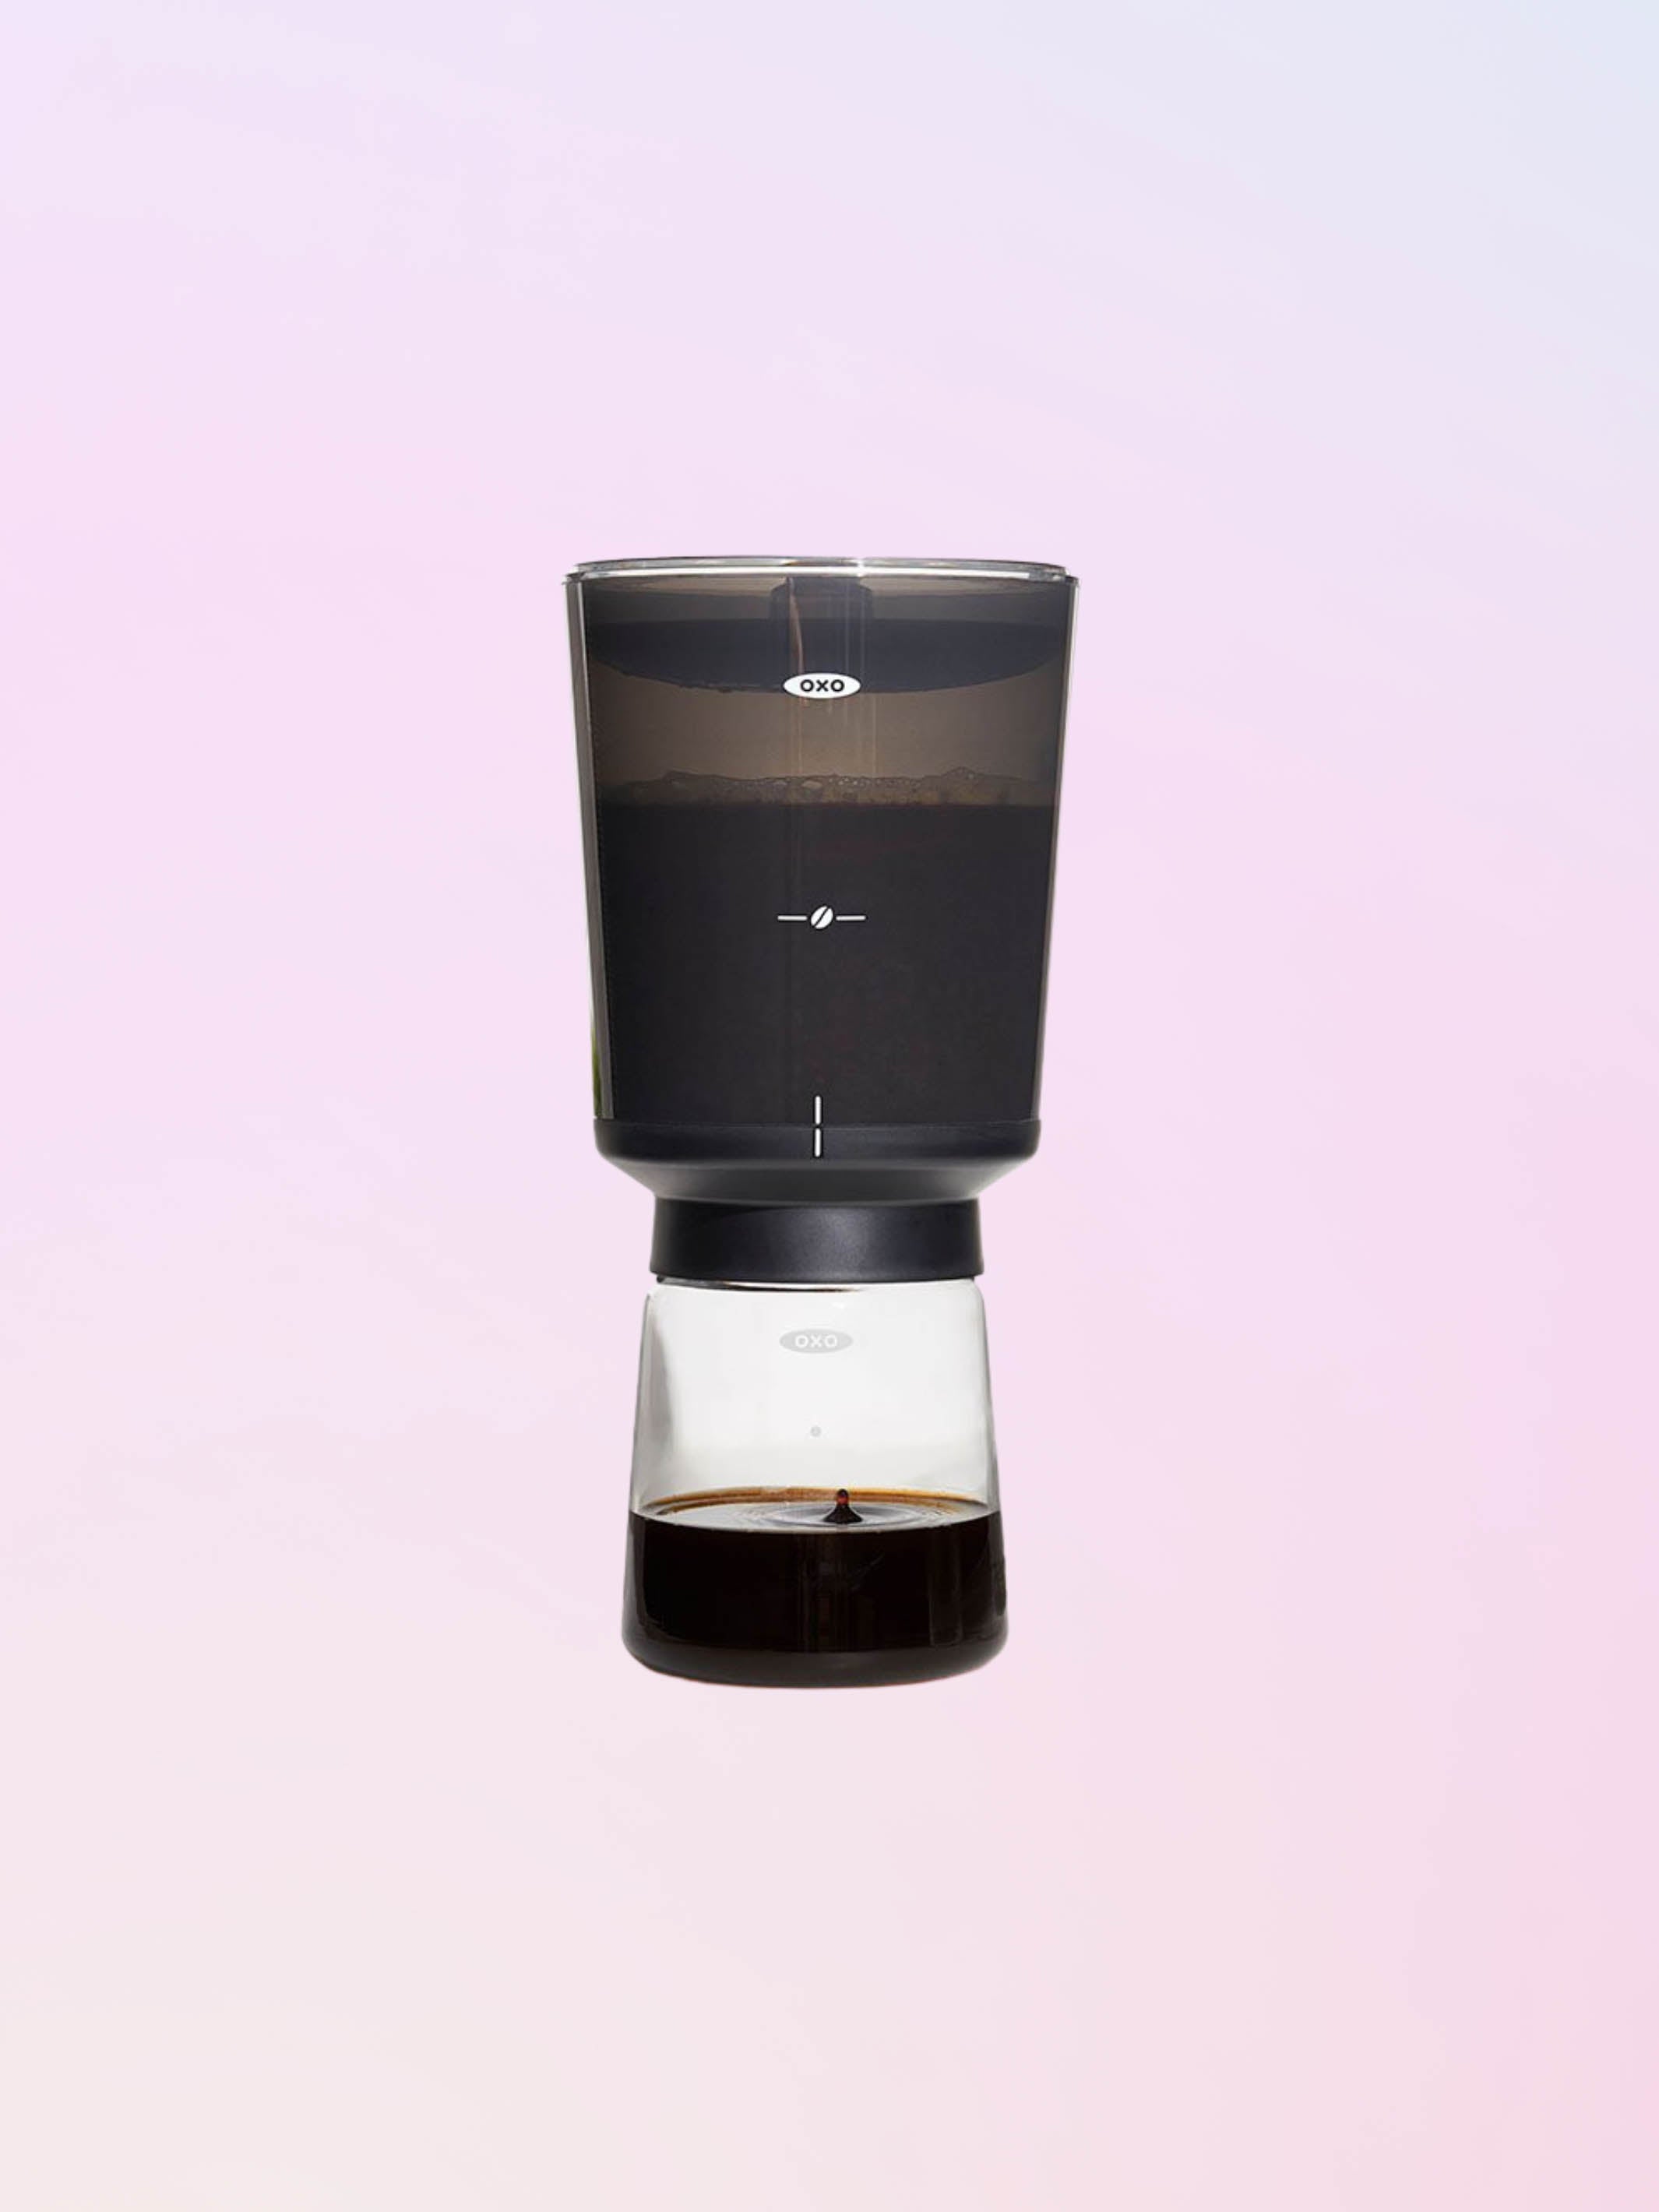 Coffee brewing in a OXO compact coffee cold brewer and finished cold brew in the bottom carafe..